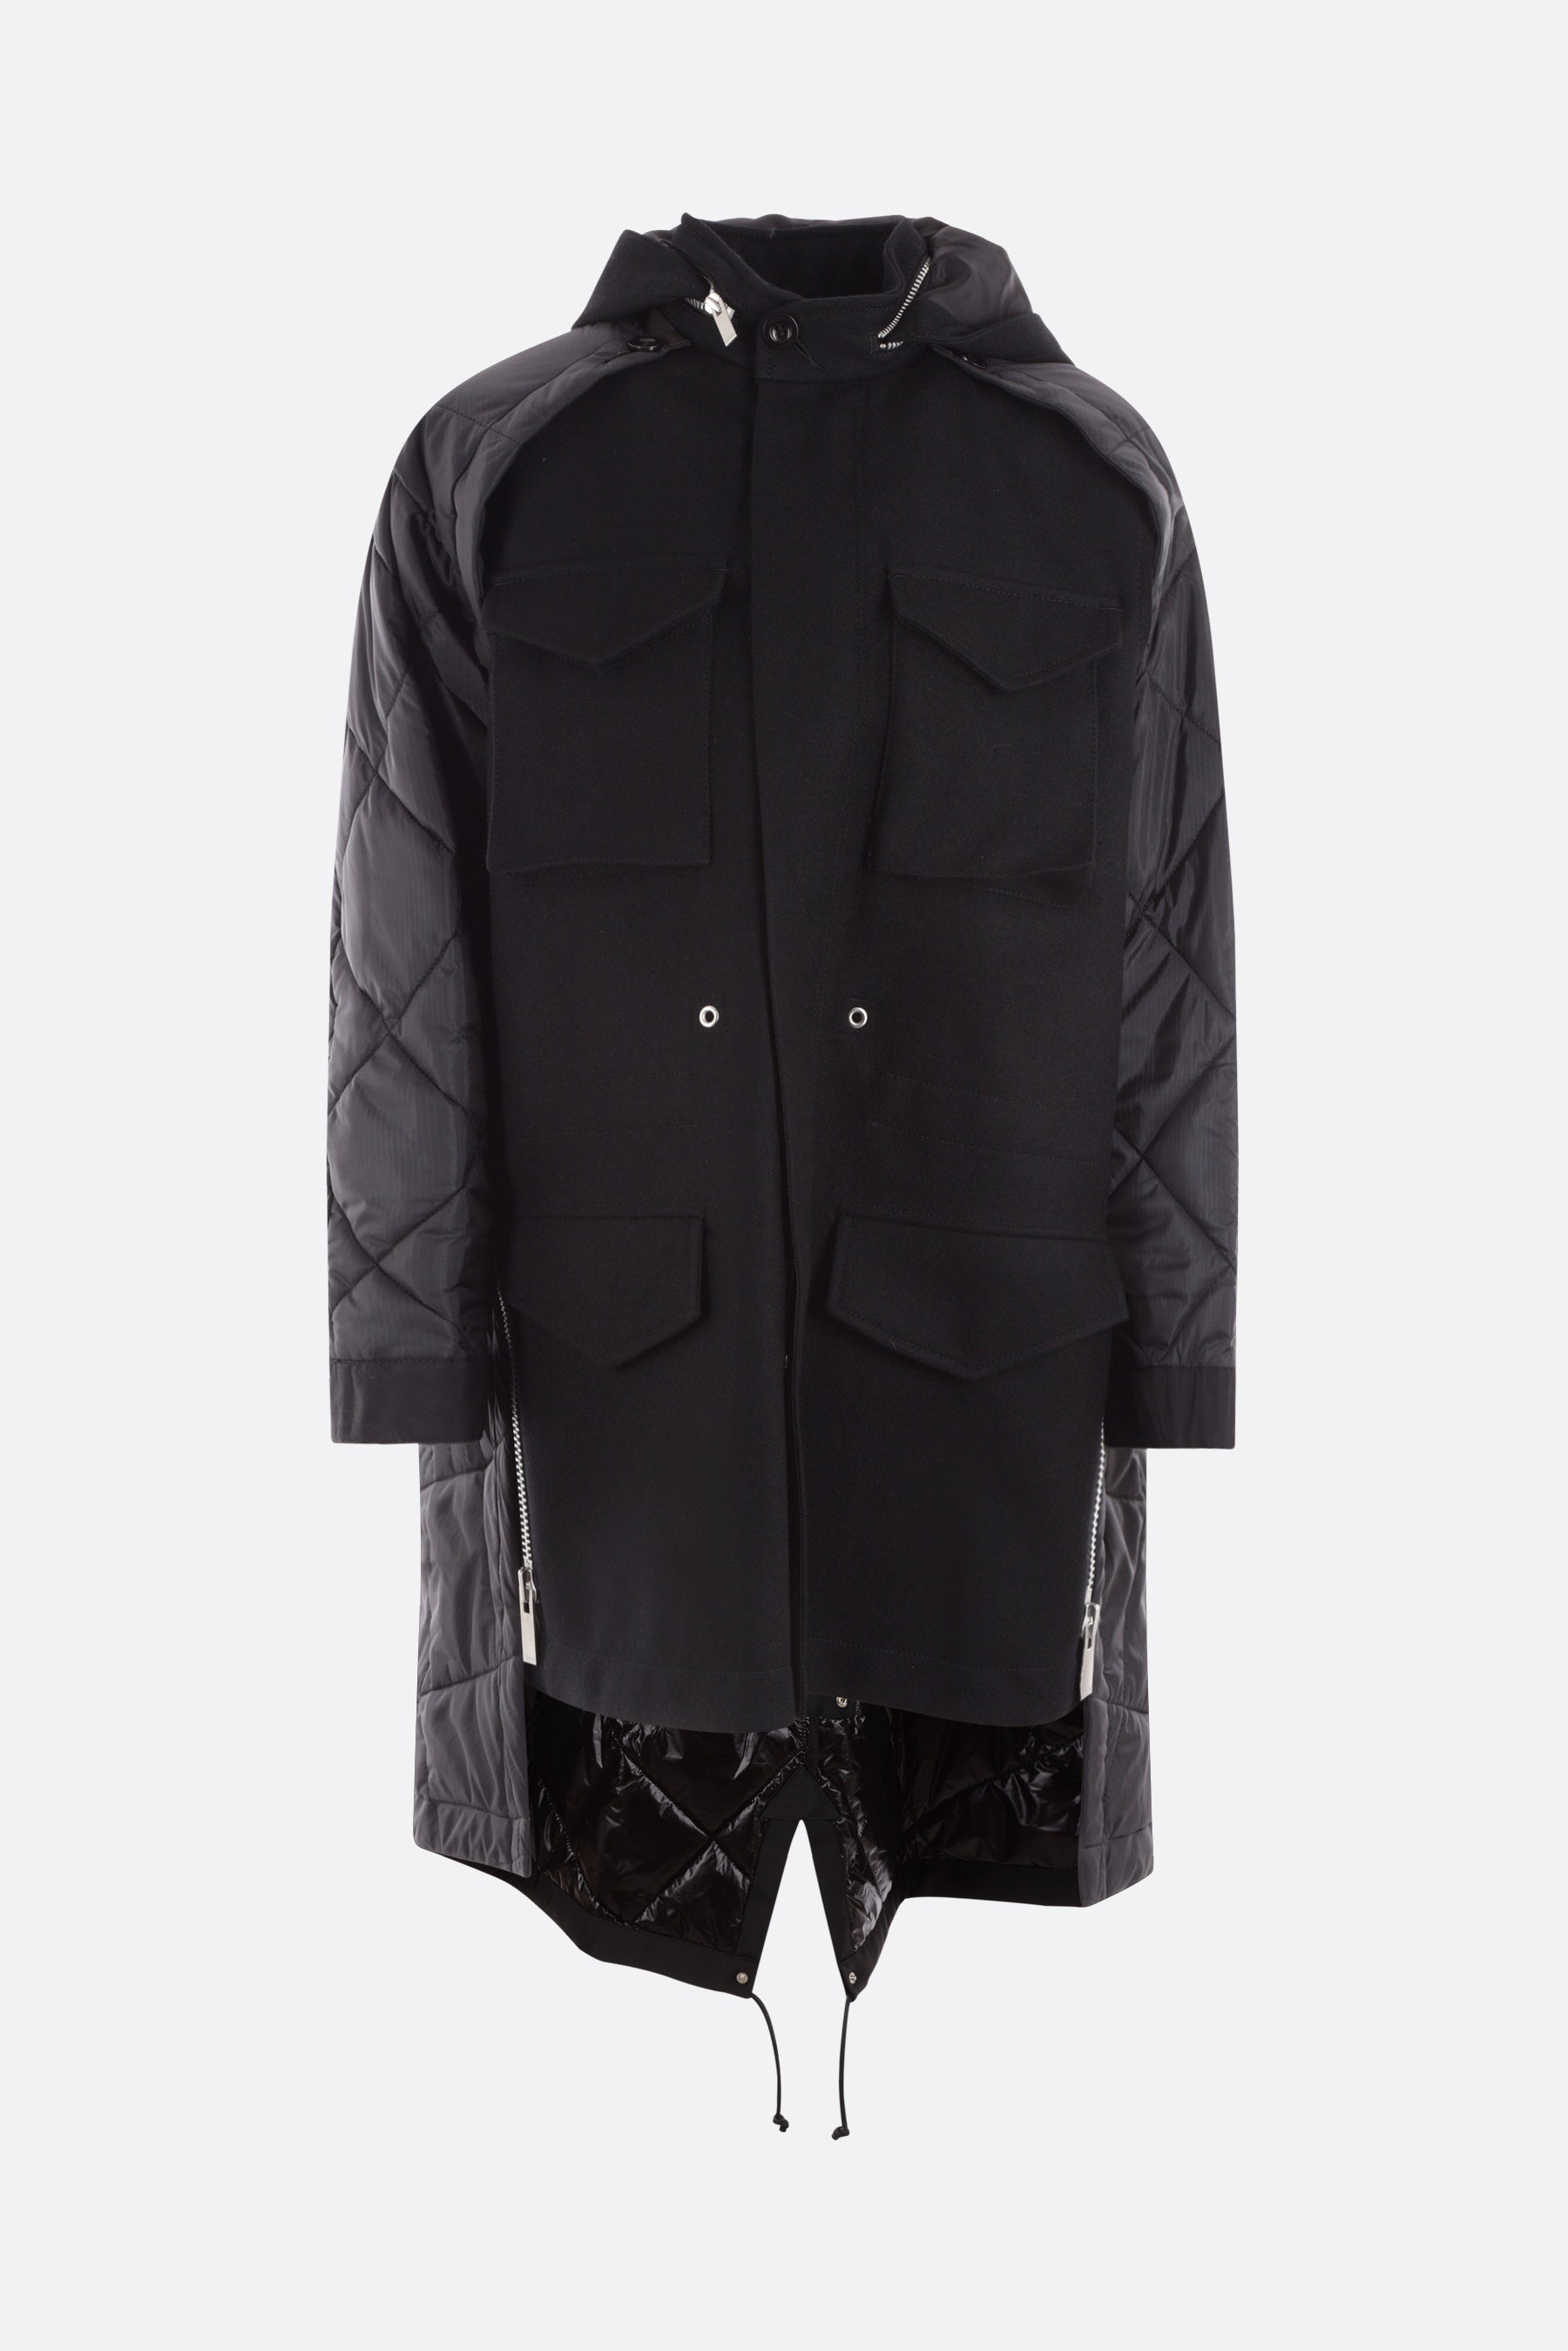 wool and nylon sectioned jacket